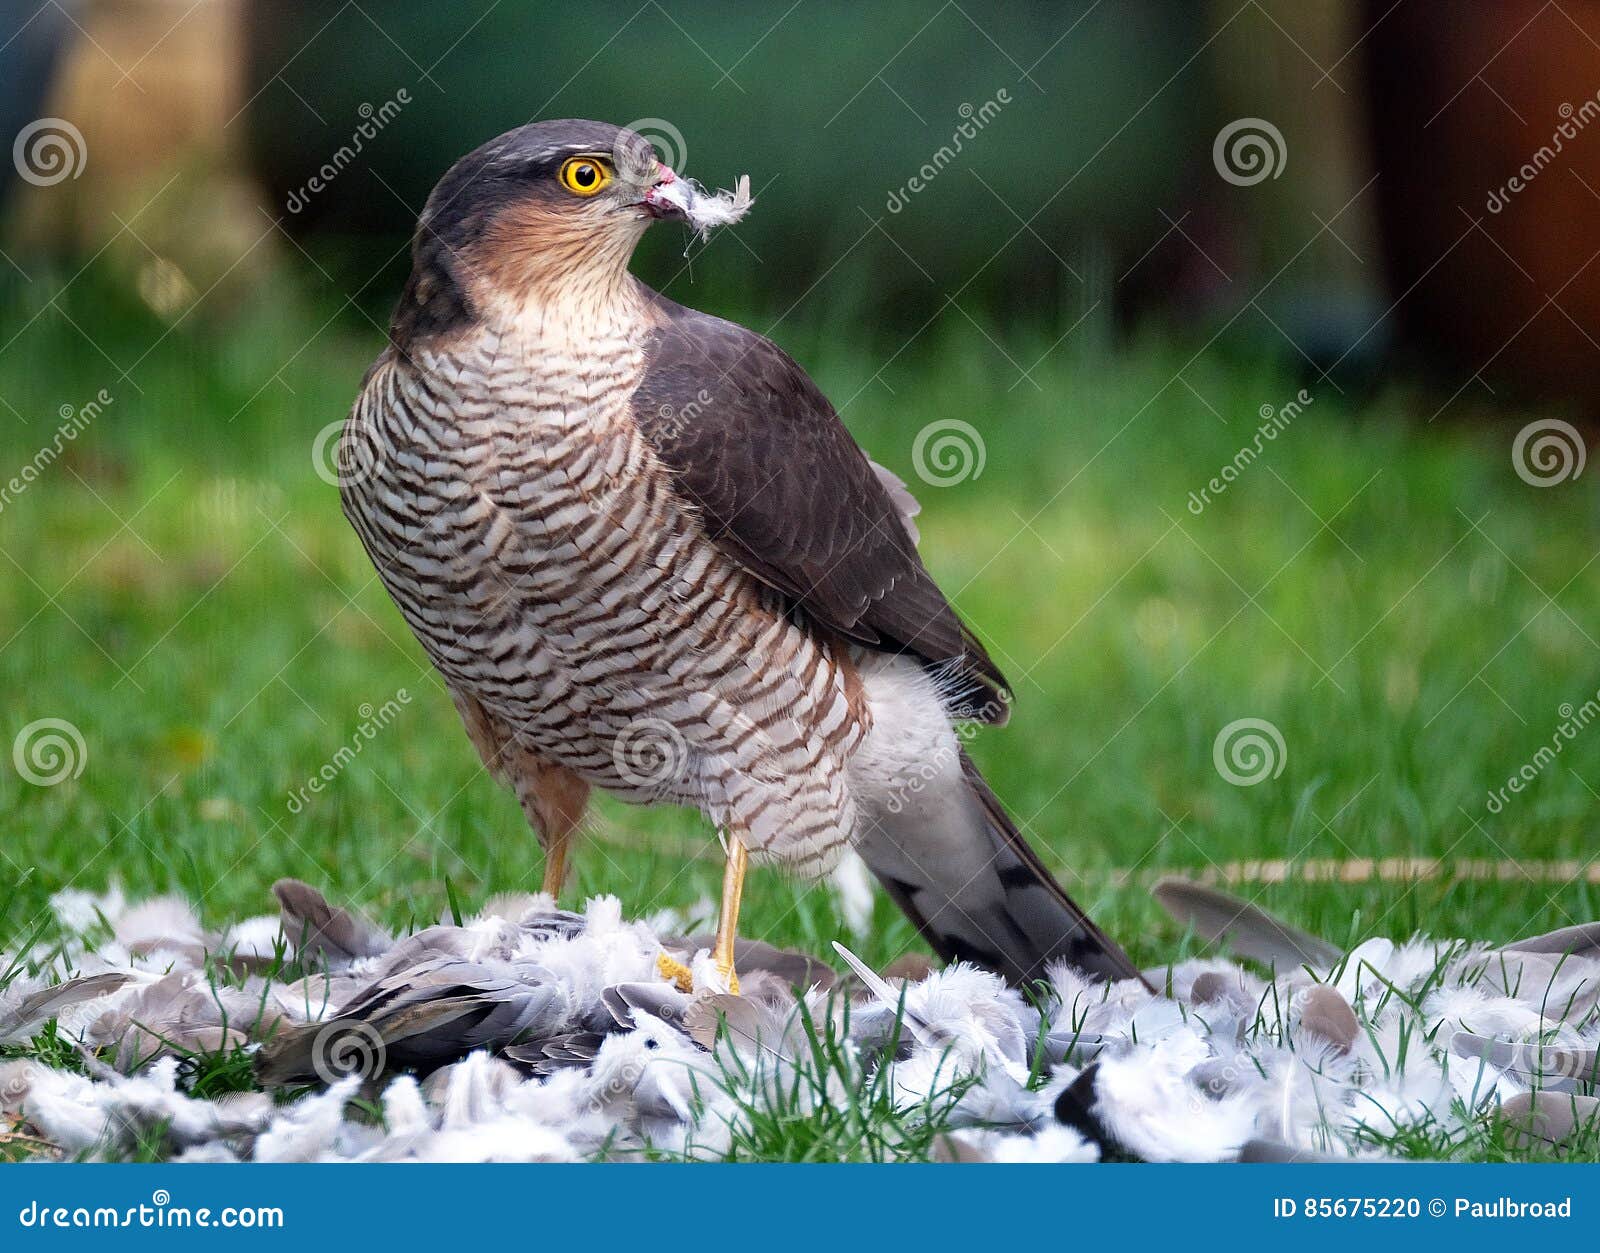 female sparrowhawk with kill. the sparrowhawk, is a small bird of prey in the family accipitridae.